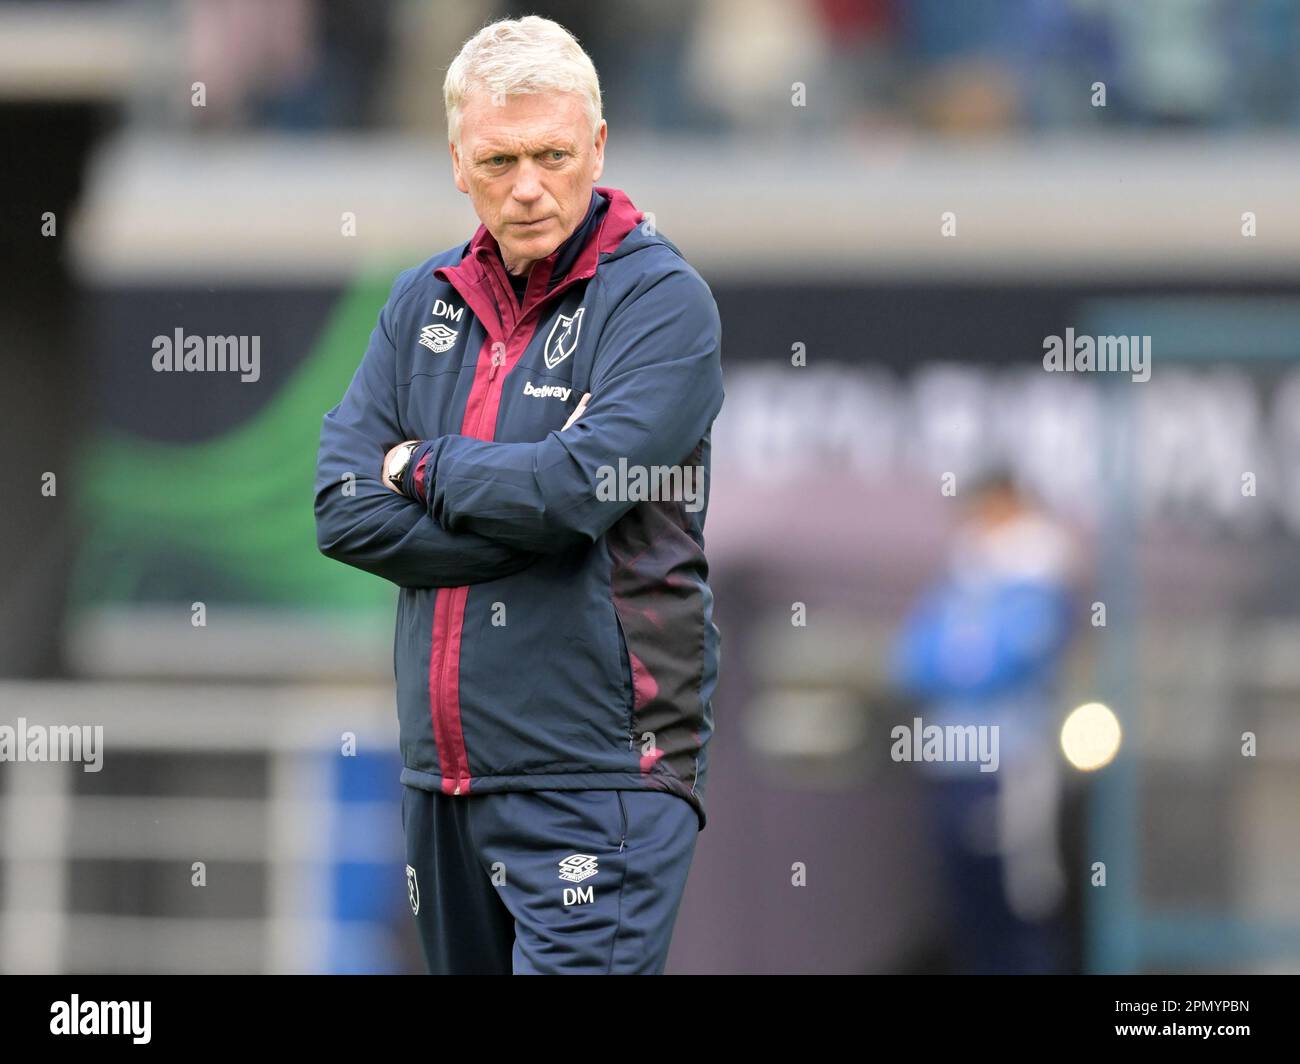 GENT - West Ham United FC trainer coach David Moyes during the UEFA  Conference League quarterfinal match between KAA Gent and West Ham United  at Ghelamco Arena on April 13, 2023 in